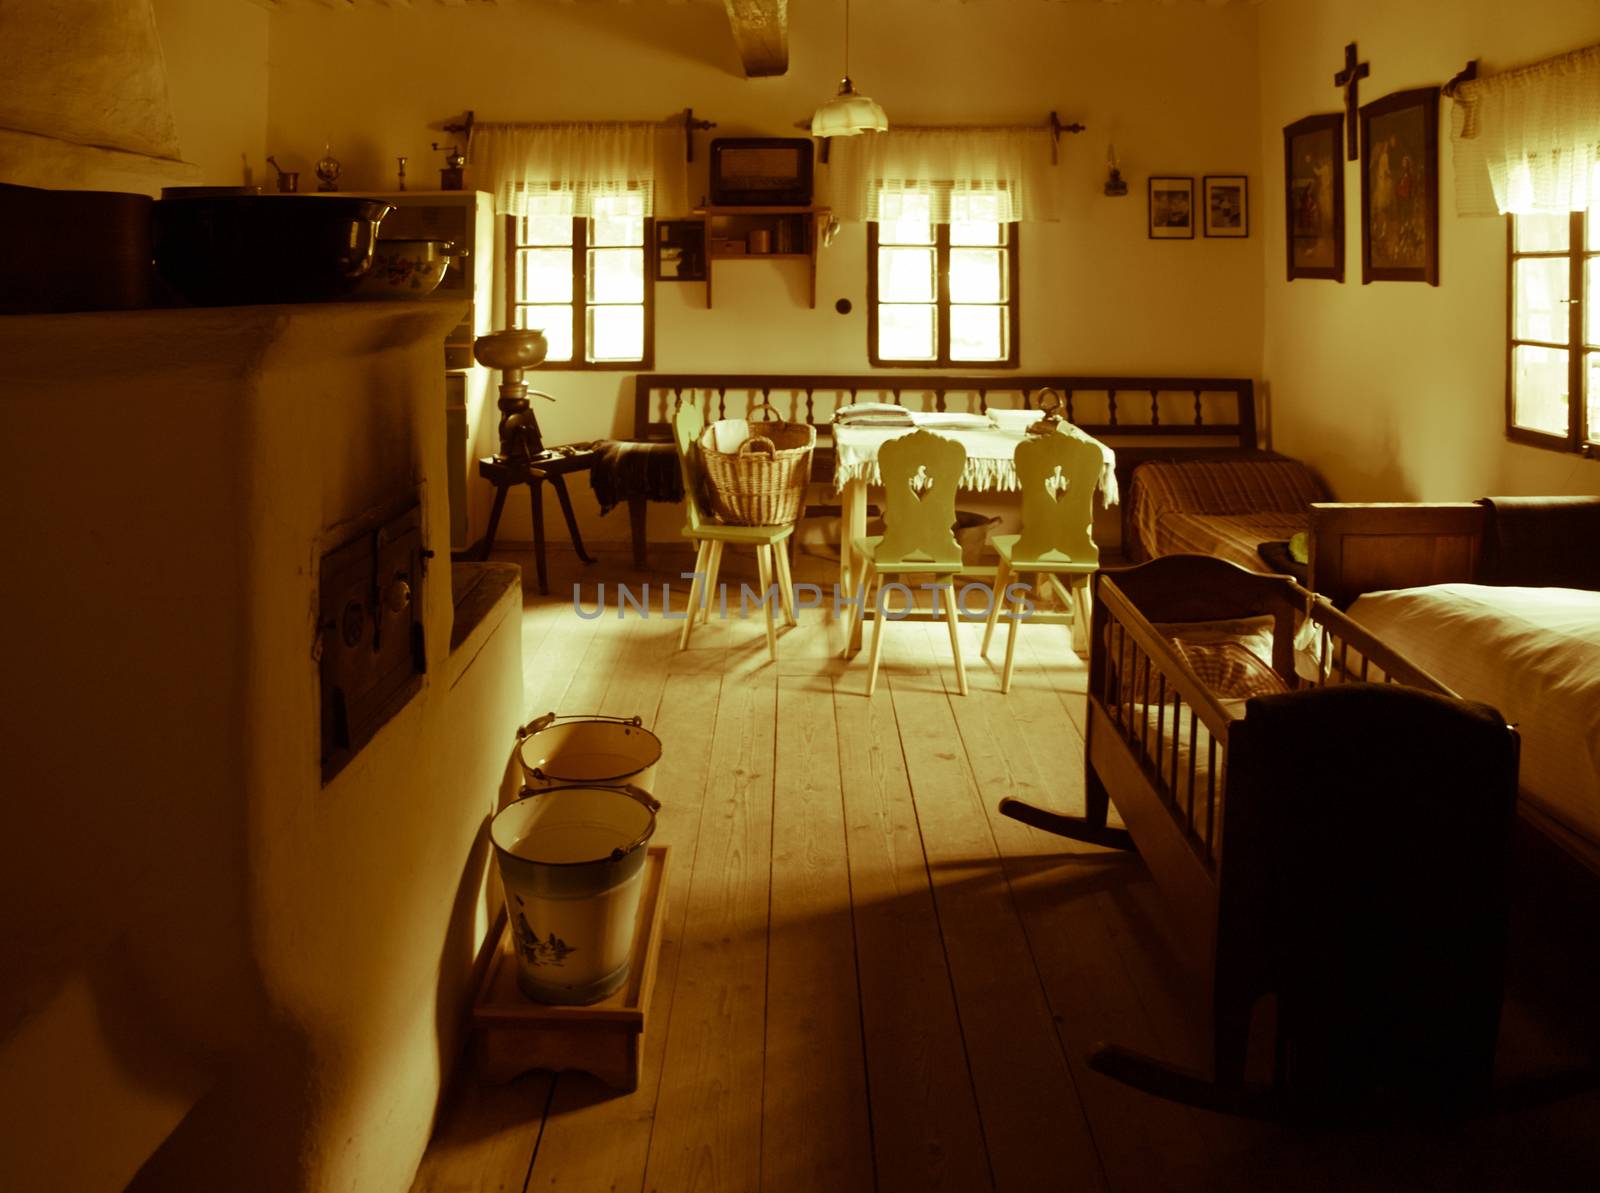 Vintage room with bed, cradle, furnace, table and chairs in old rural house. Sepia style image.